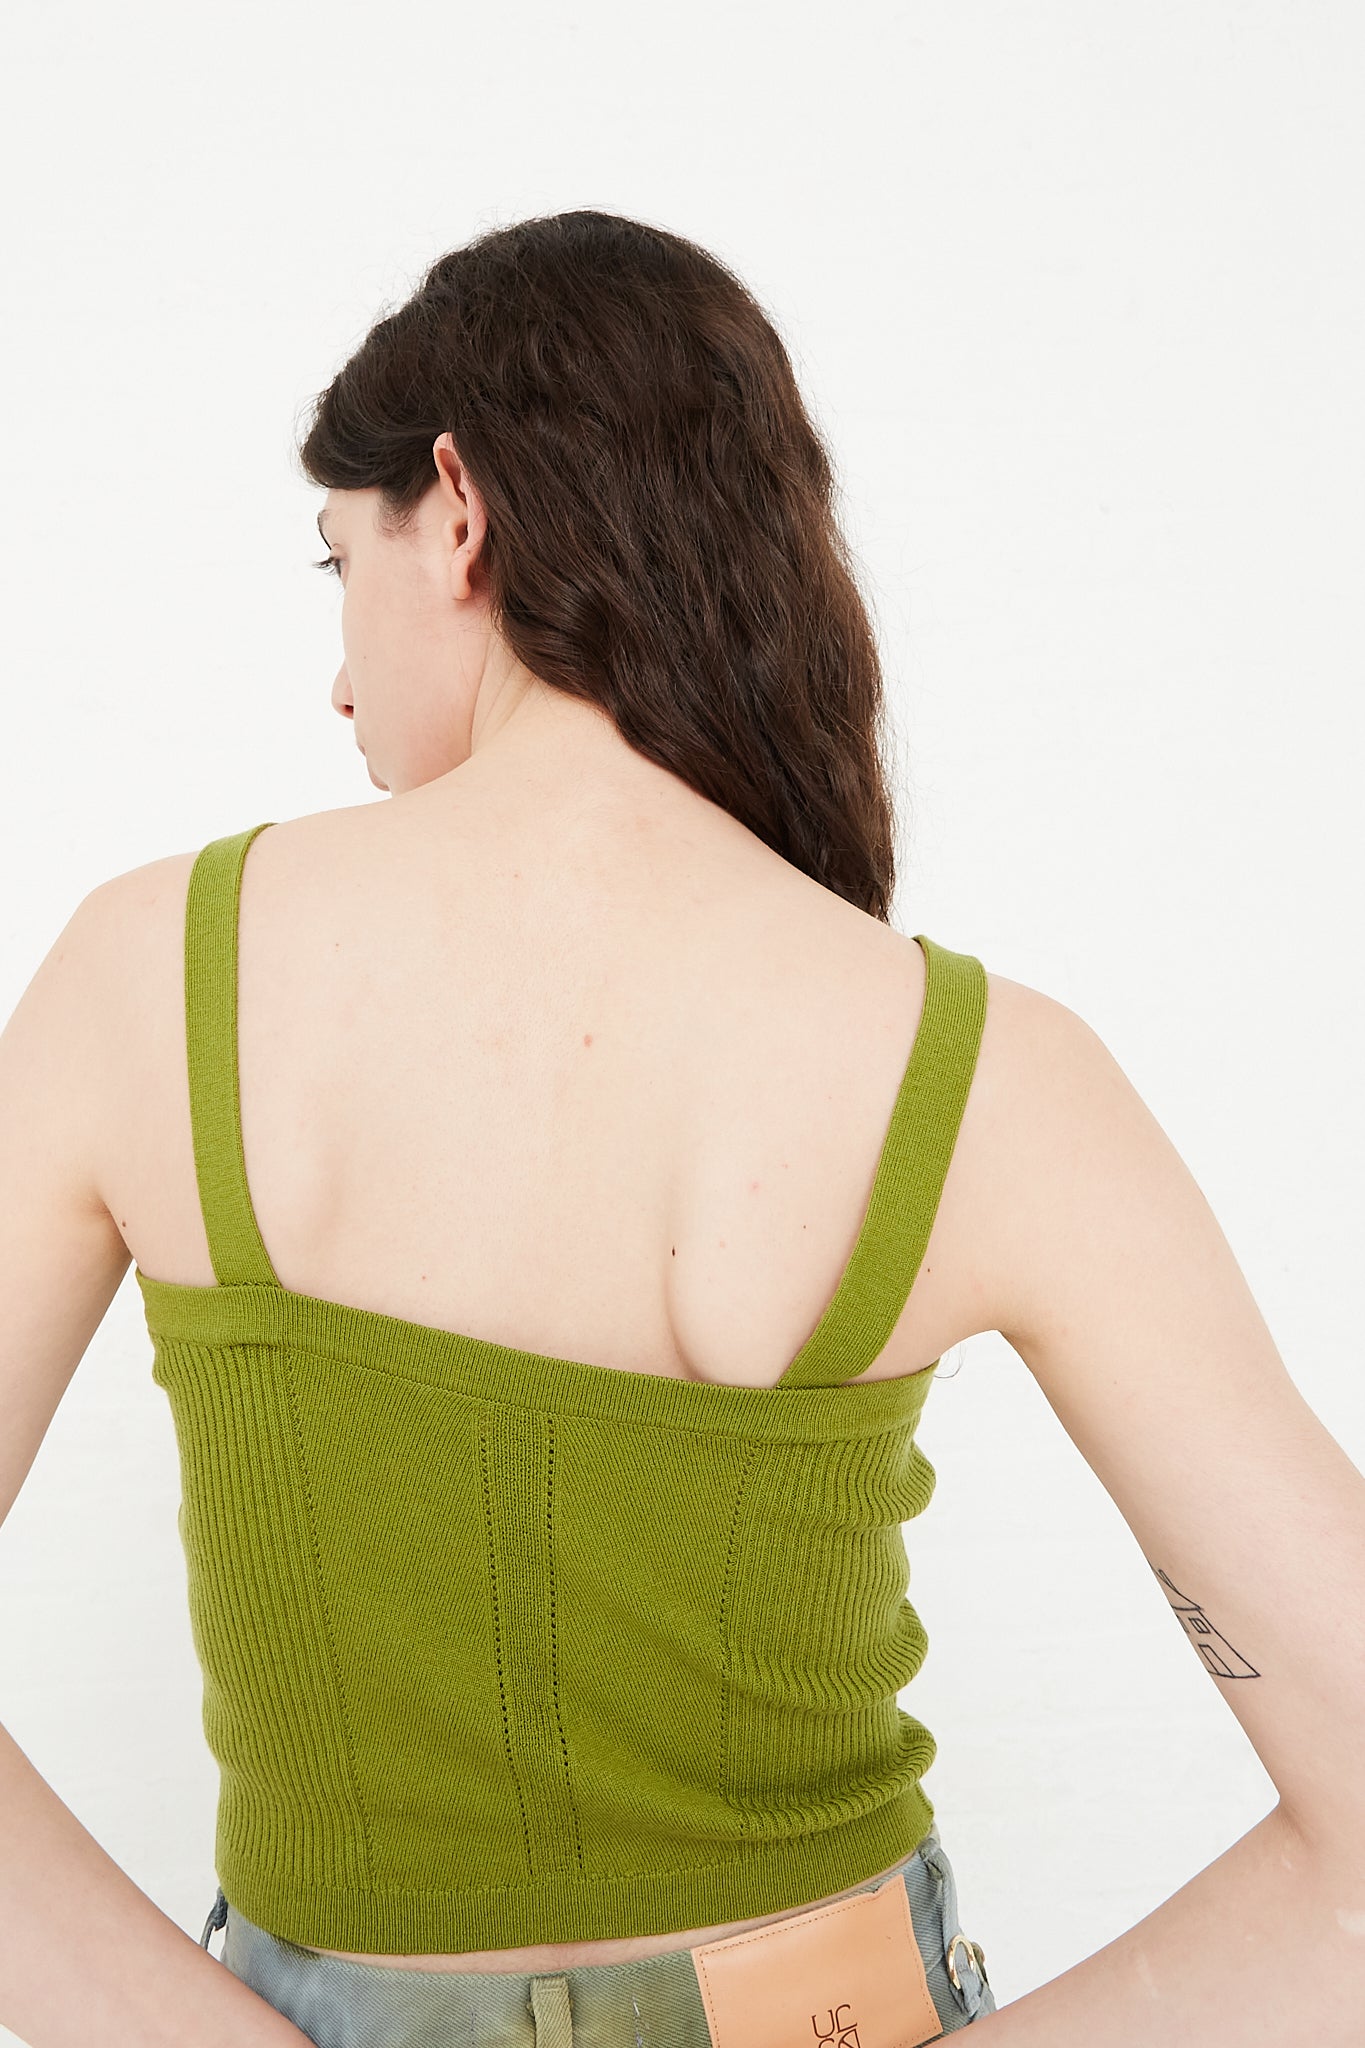 Ulla Johnson Giselle Top in Willow back view